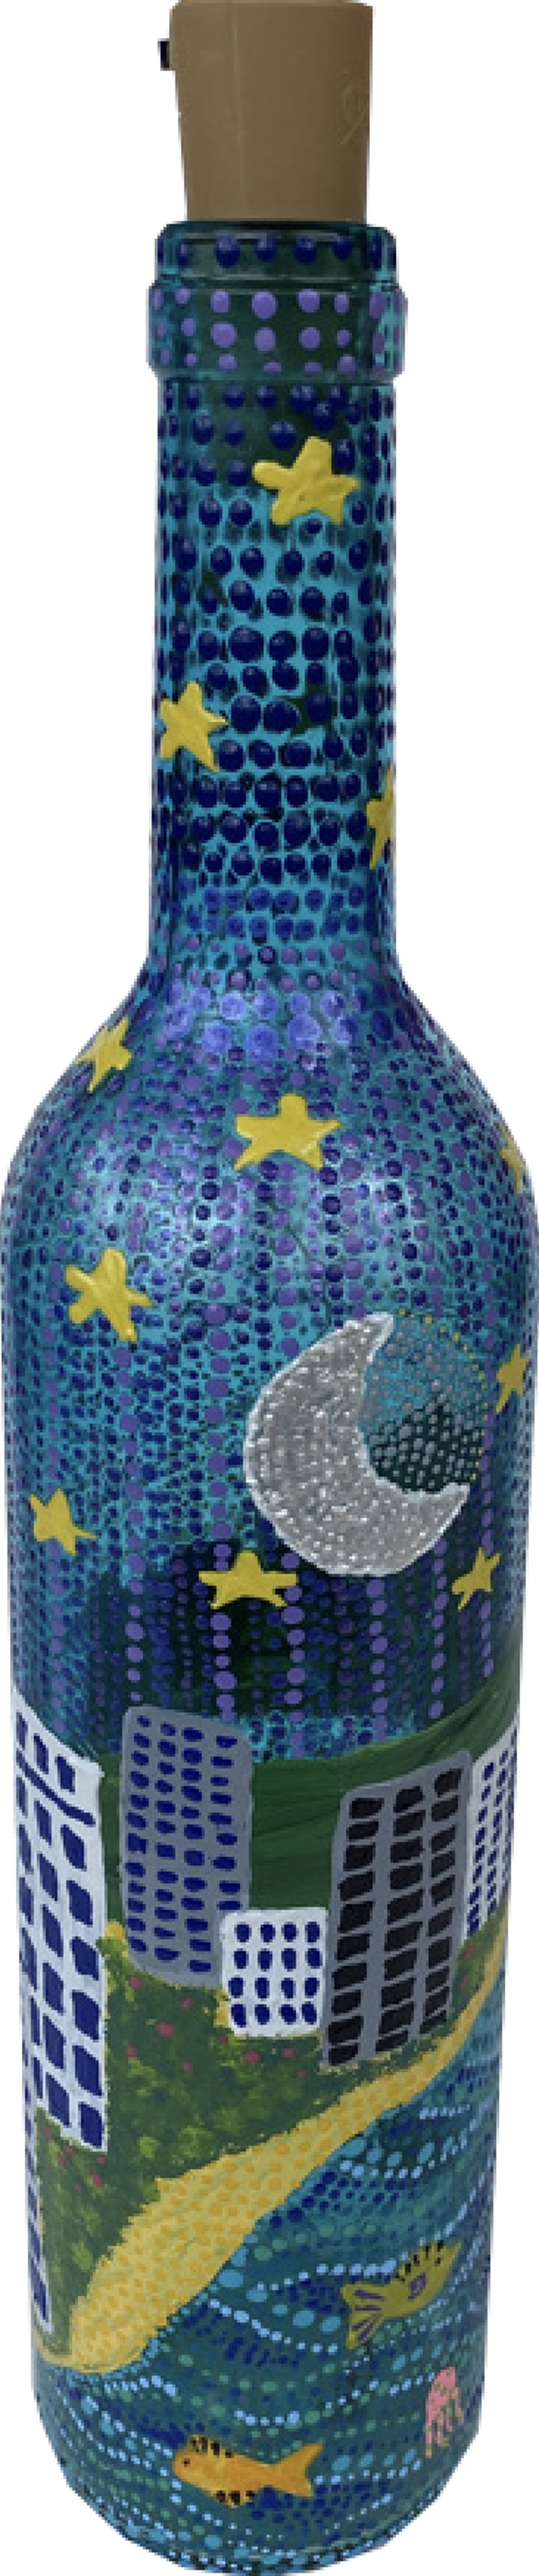 Lighted Glass Bottle - Moonlight by Carolyn Morgan Bauer